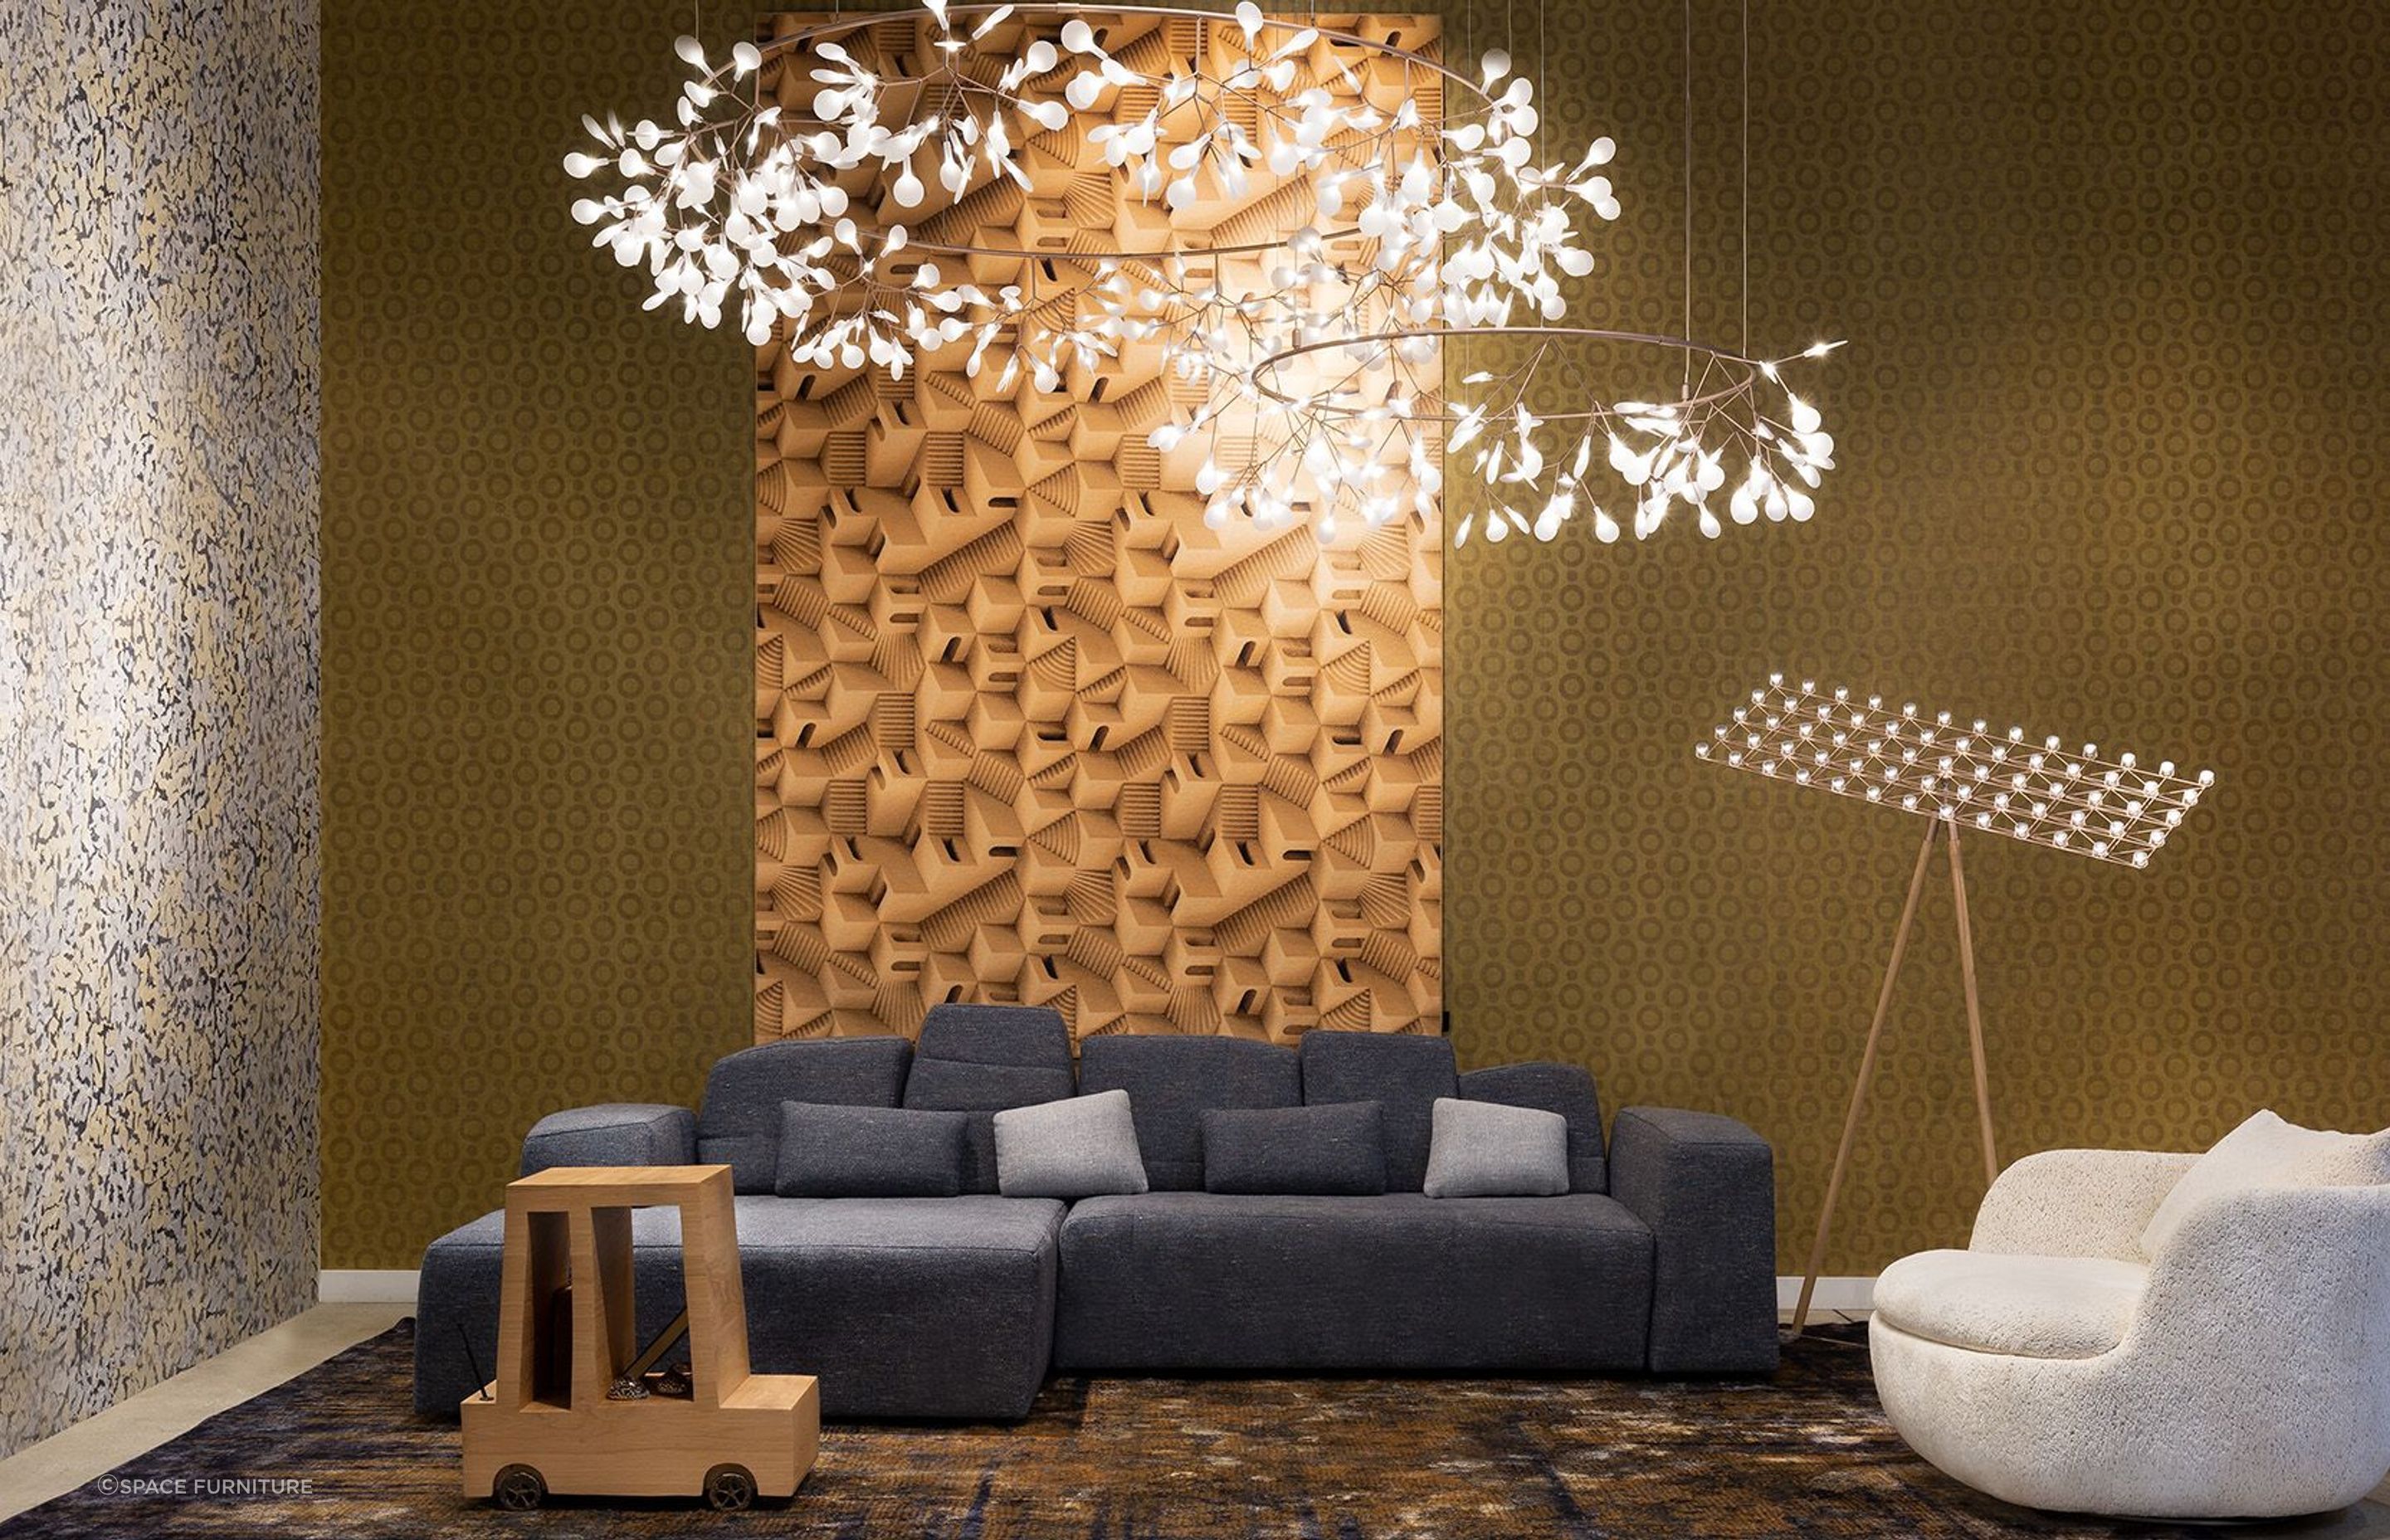 Heracleum The Big O Suspension Lamp by Special Lights